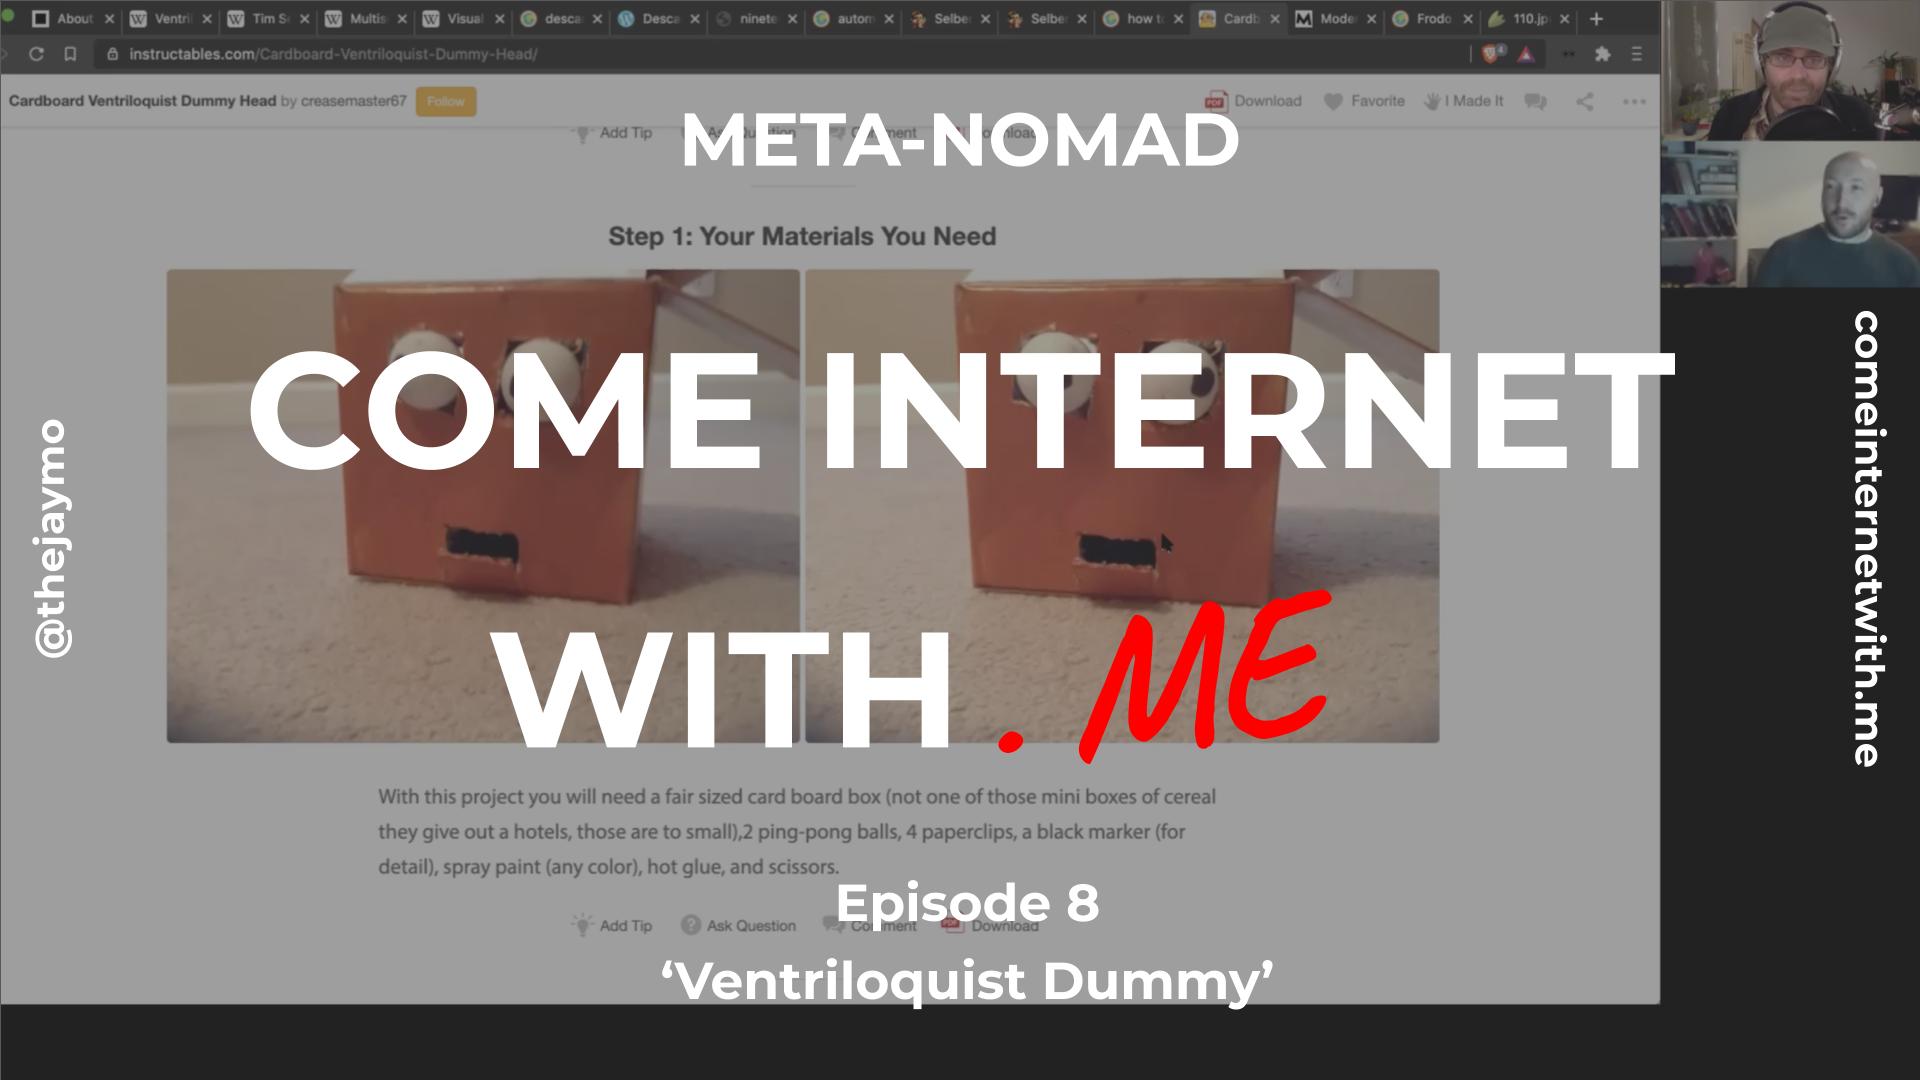 Come Internet With Me Cover Meta-Nomad